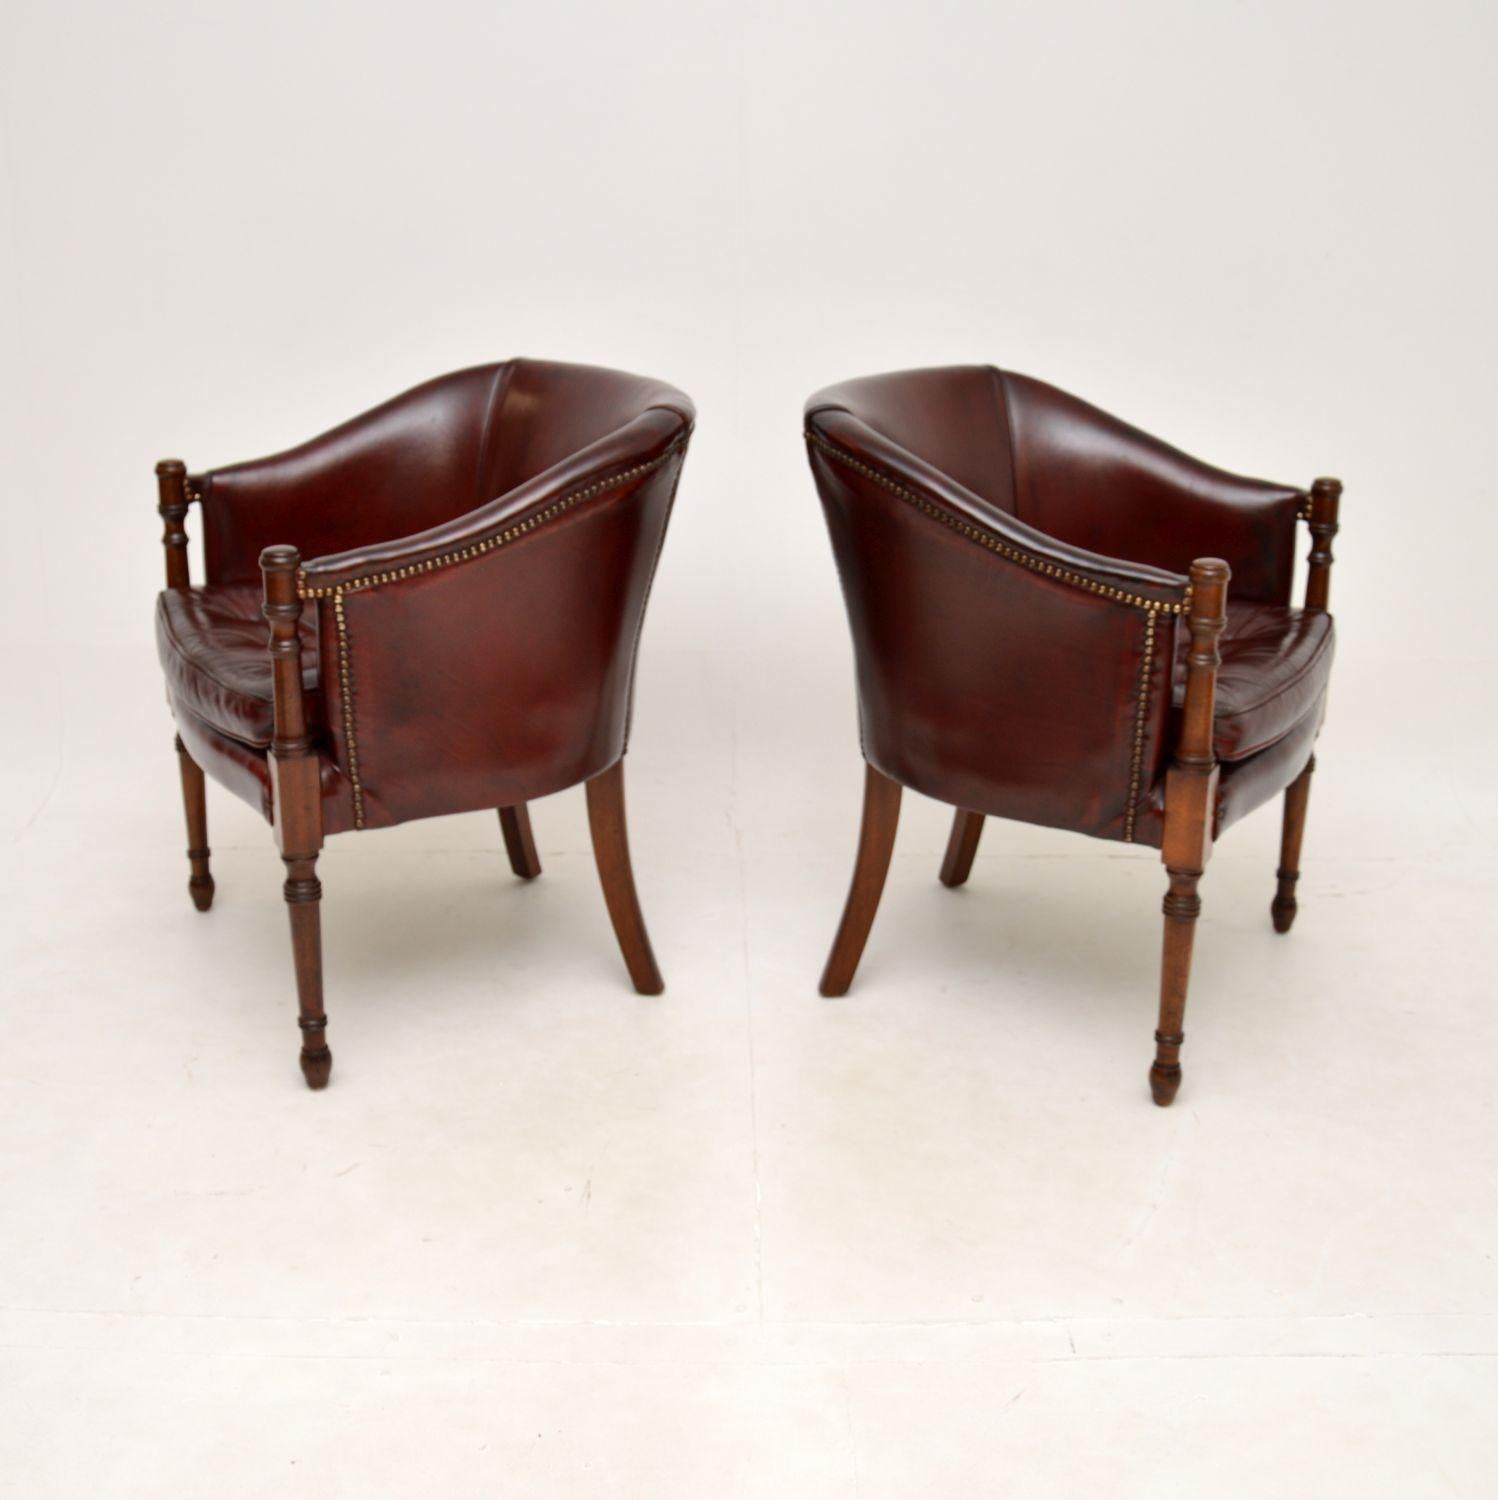 British Pair of Antique Georgian Style Leather Armchairs